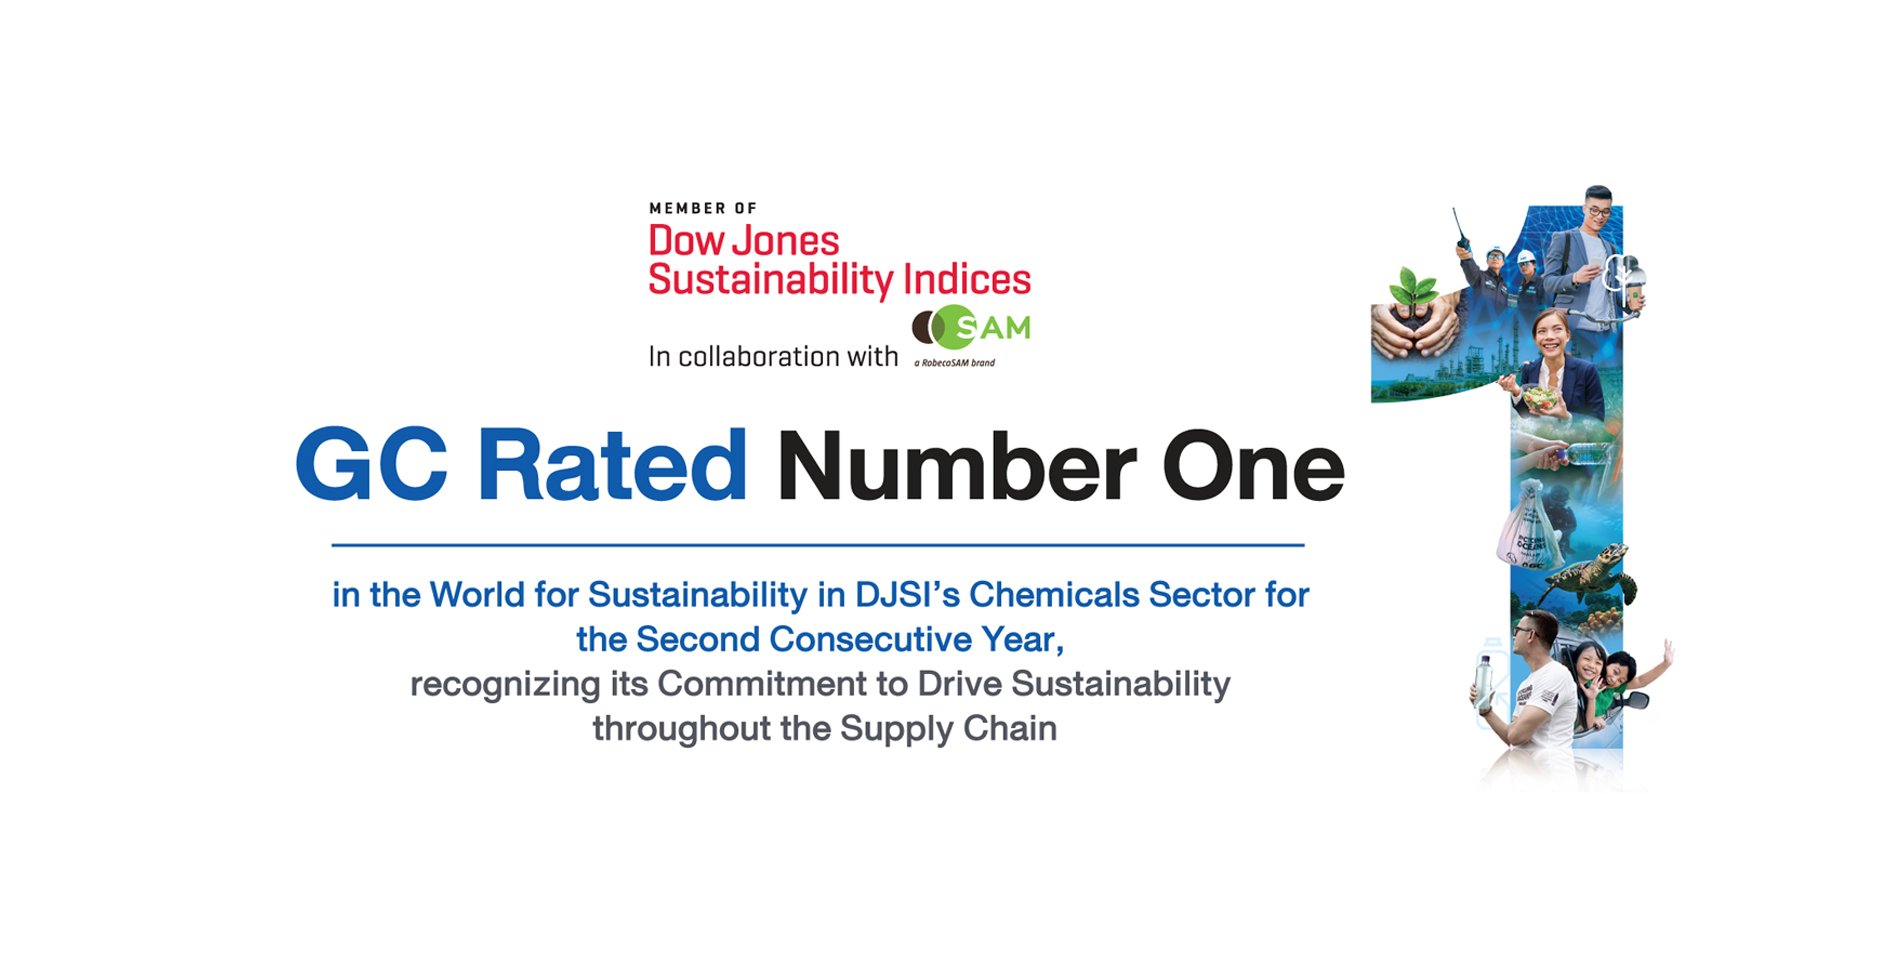 GC Rated Number One in the World for Sustainability in the DJSI chemicals industry group for the second consecutive year